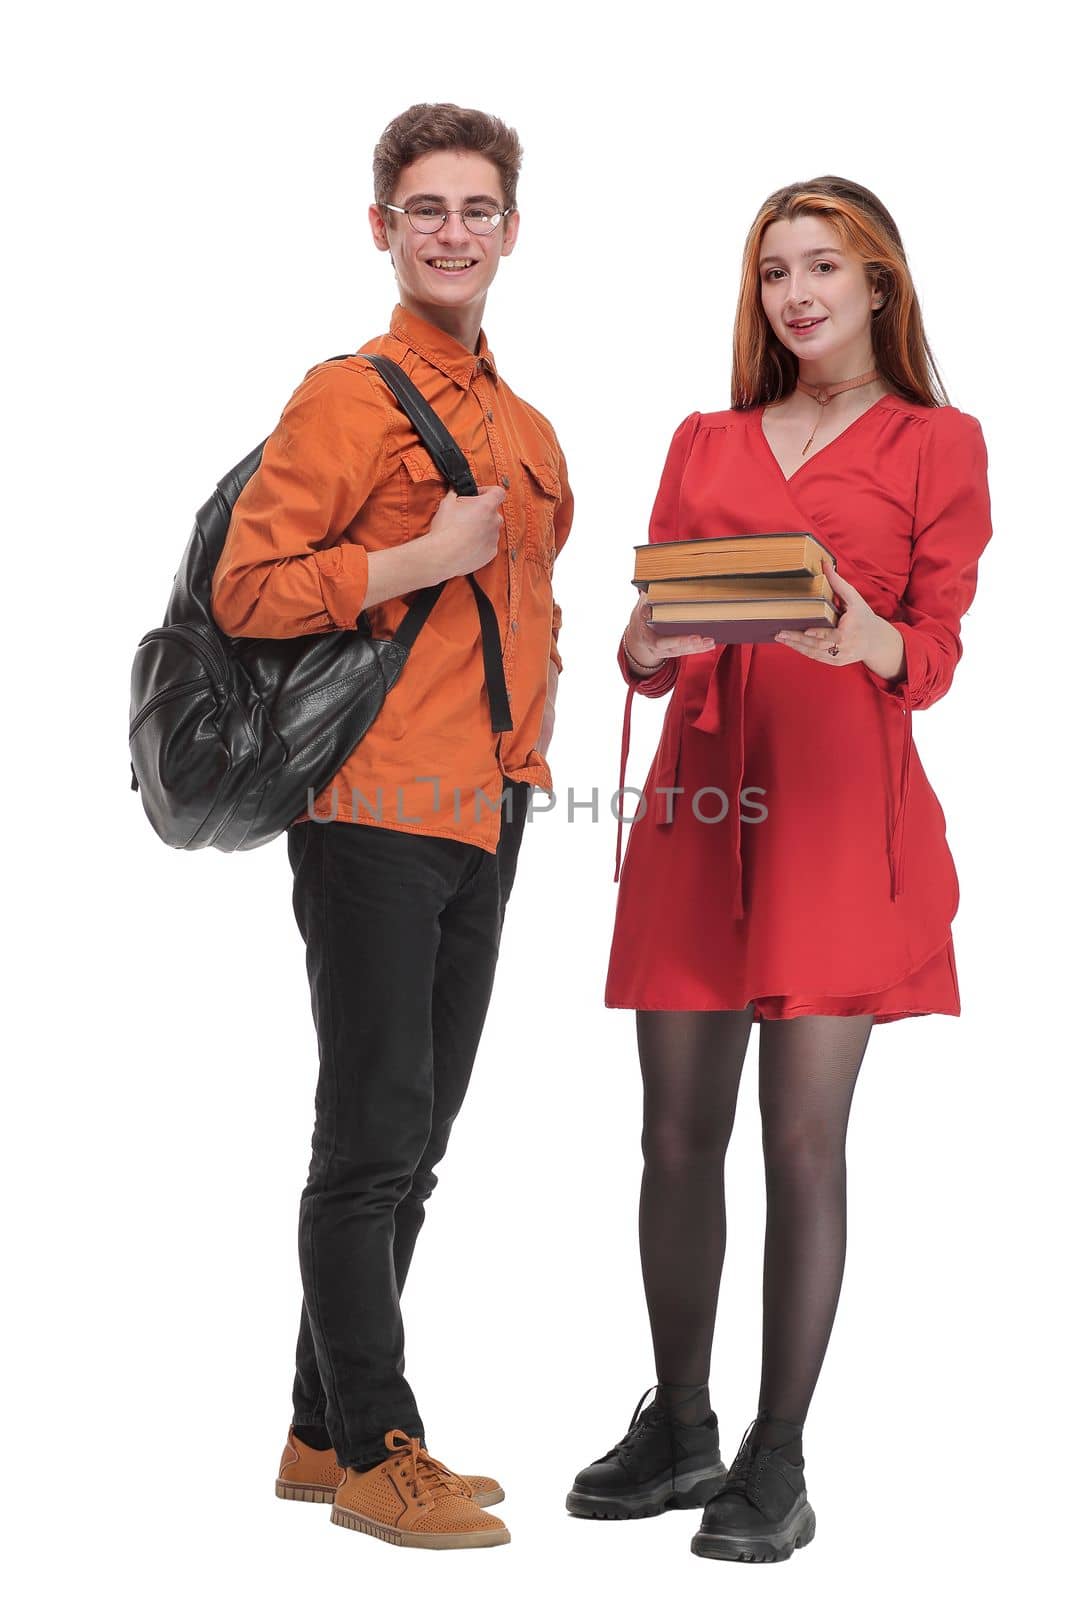 Young woman and man standing with books and bags by asdf